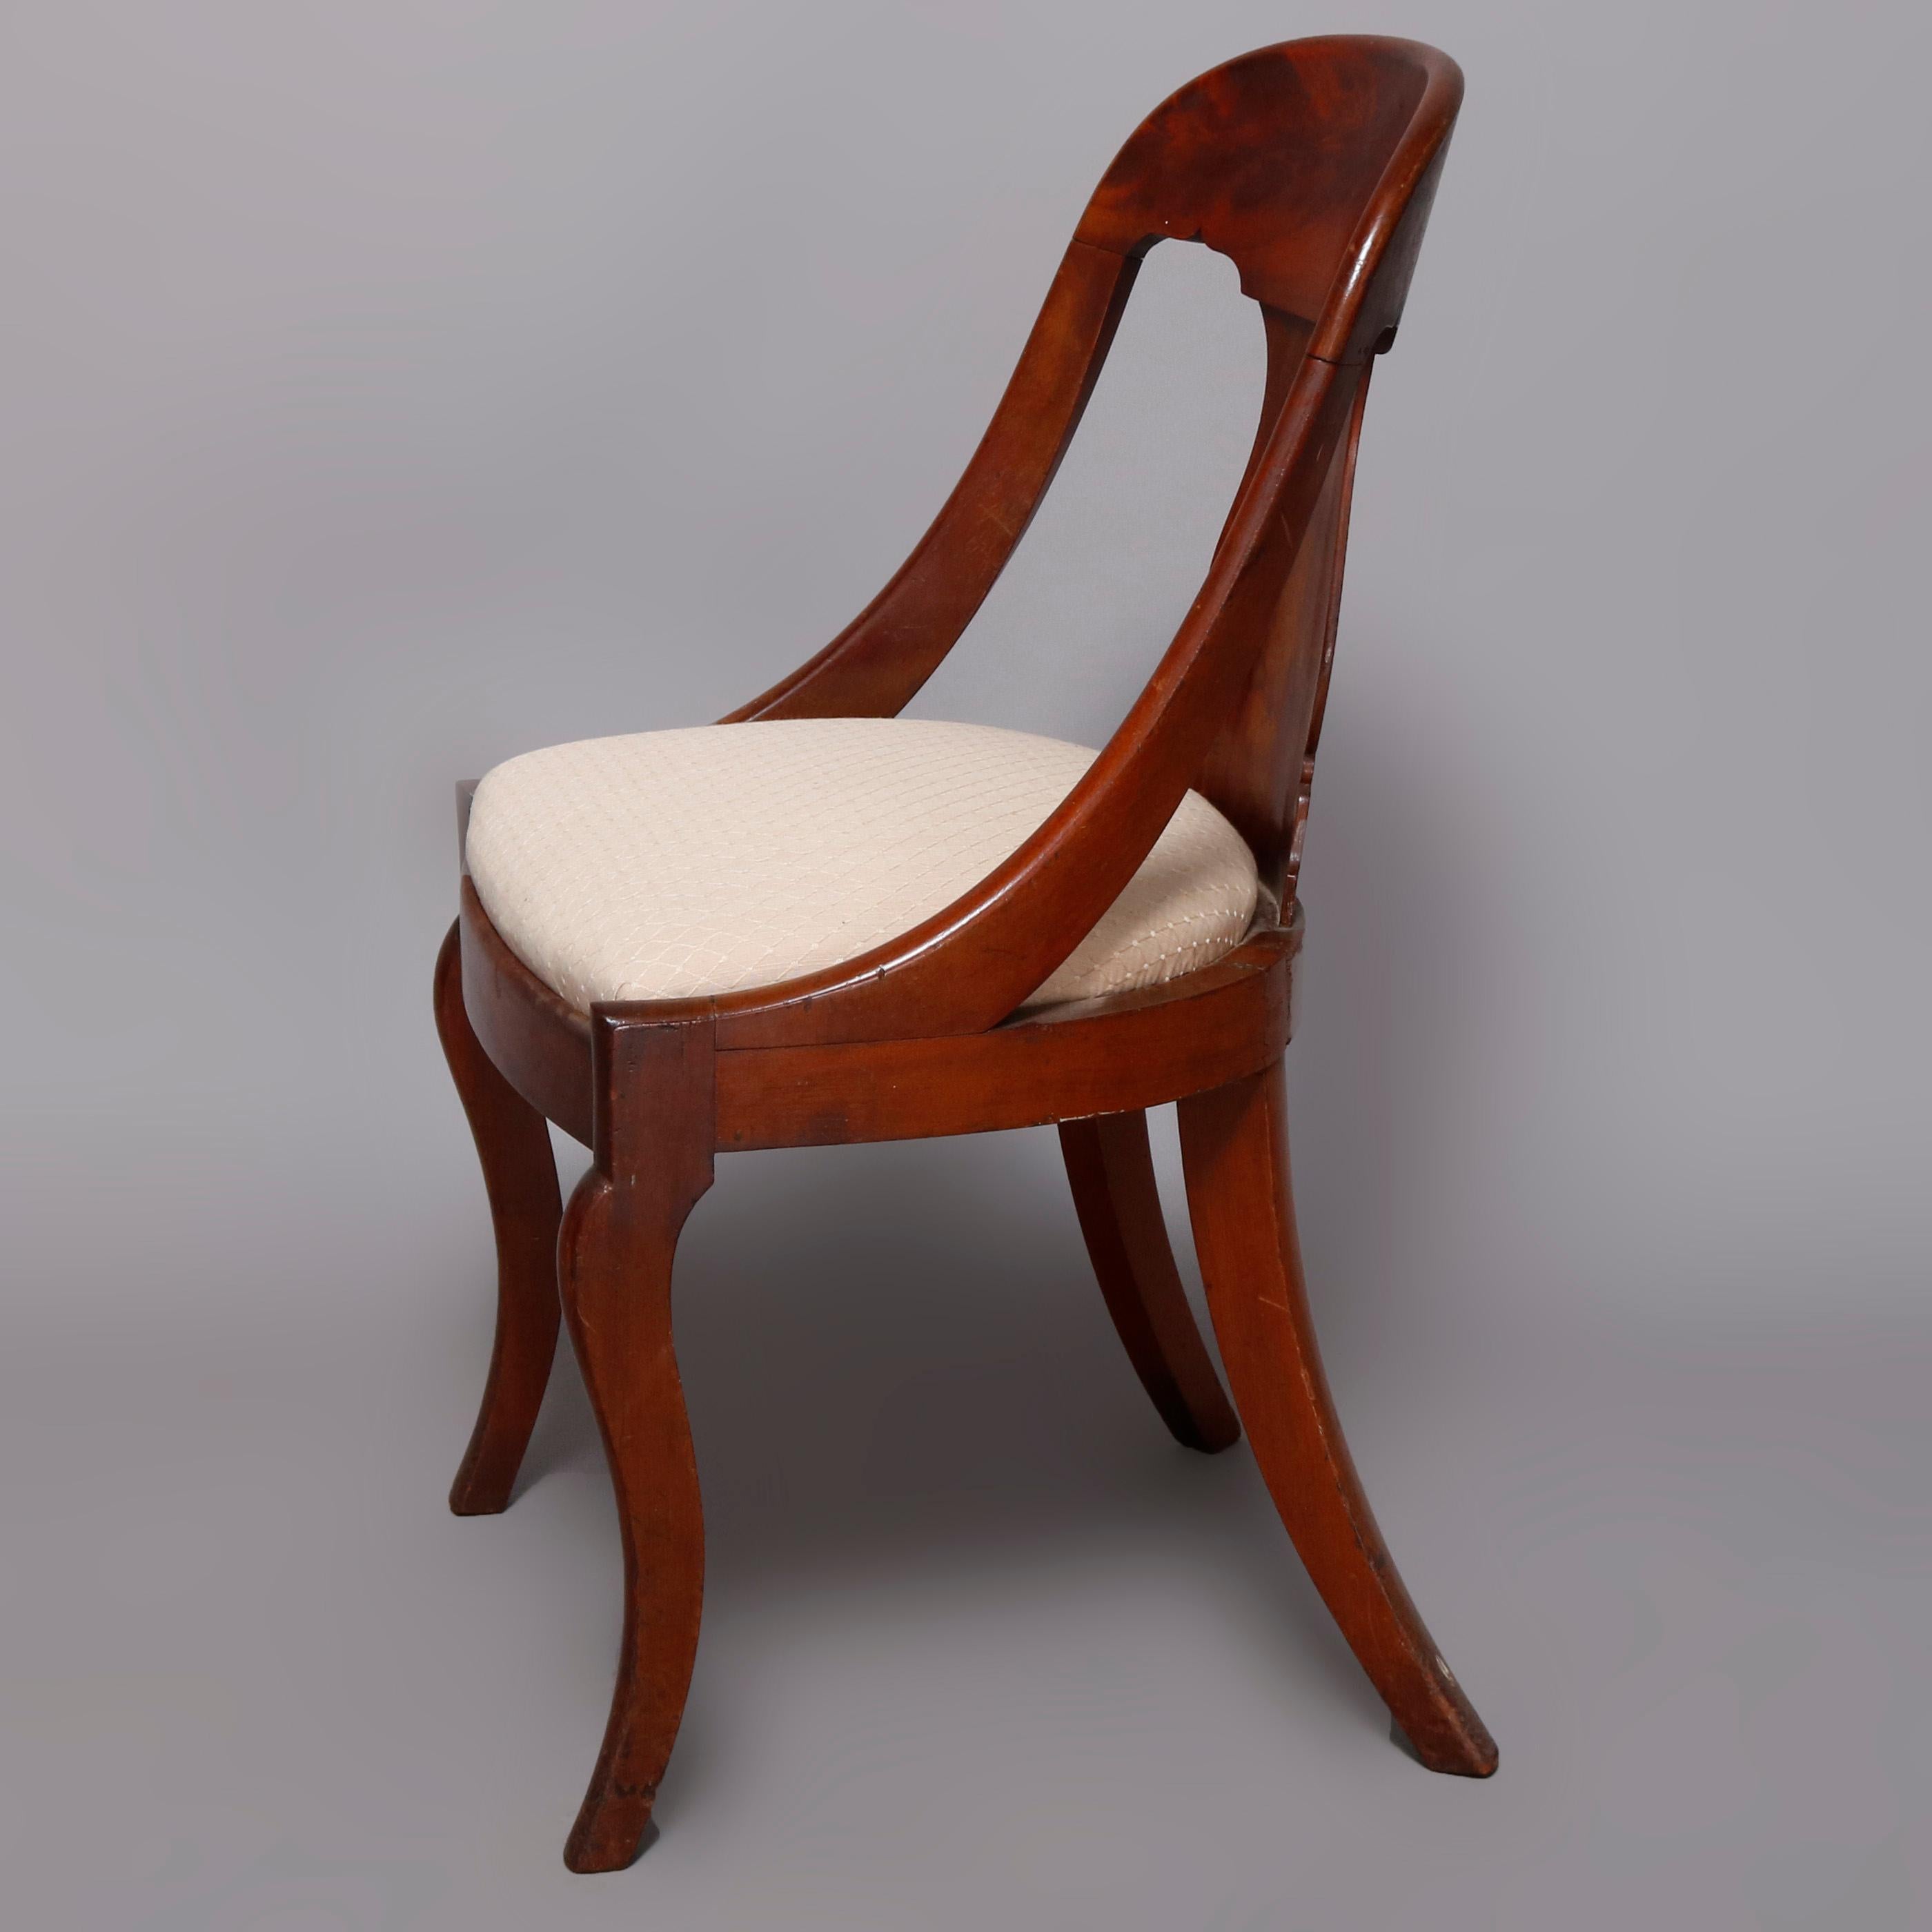 A set of four antique French Empire gondola chairs offer flame mahogany construction with bowed backs having urn form splats surmounting upholstered seats and raised on cabriole front legs, circa 1840.

Measures: 32.25